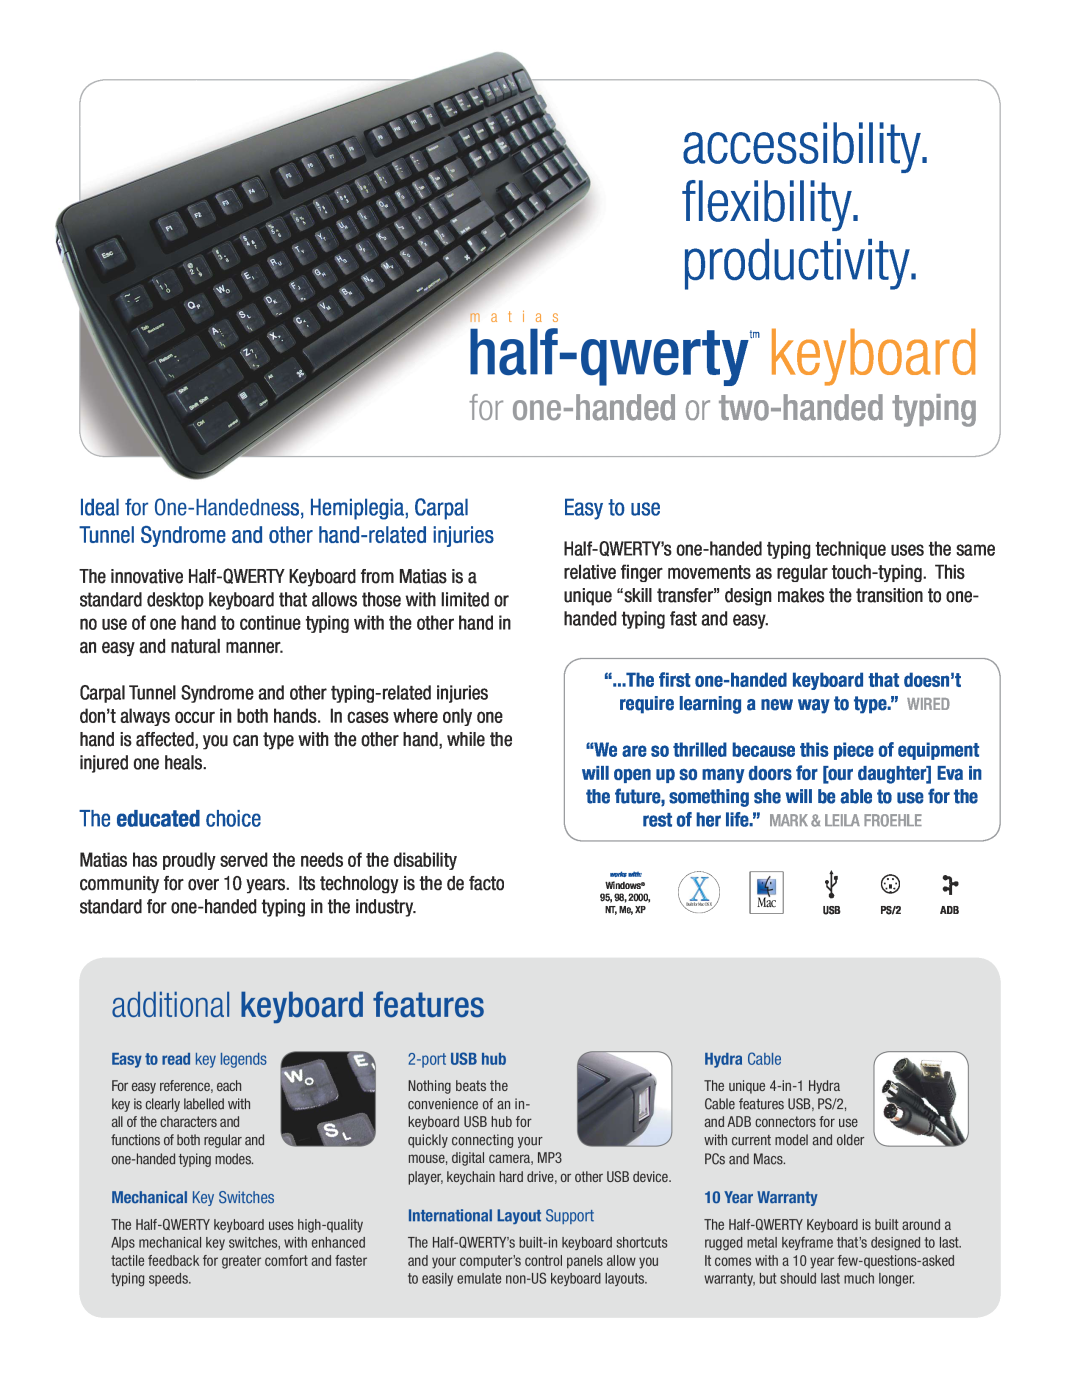 Matias Computer Keyboard warranty rest of her life.”, accessibility flexibility productivity, additional keyboard features 